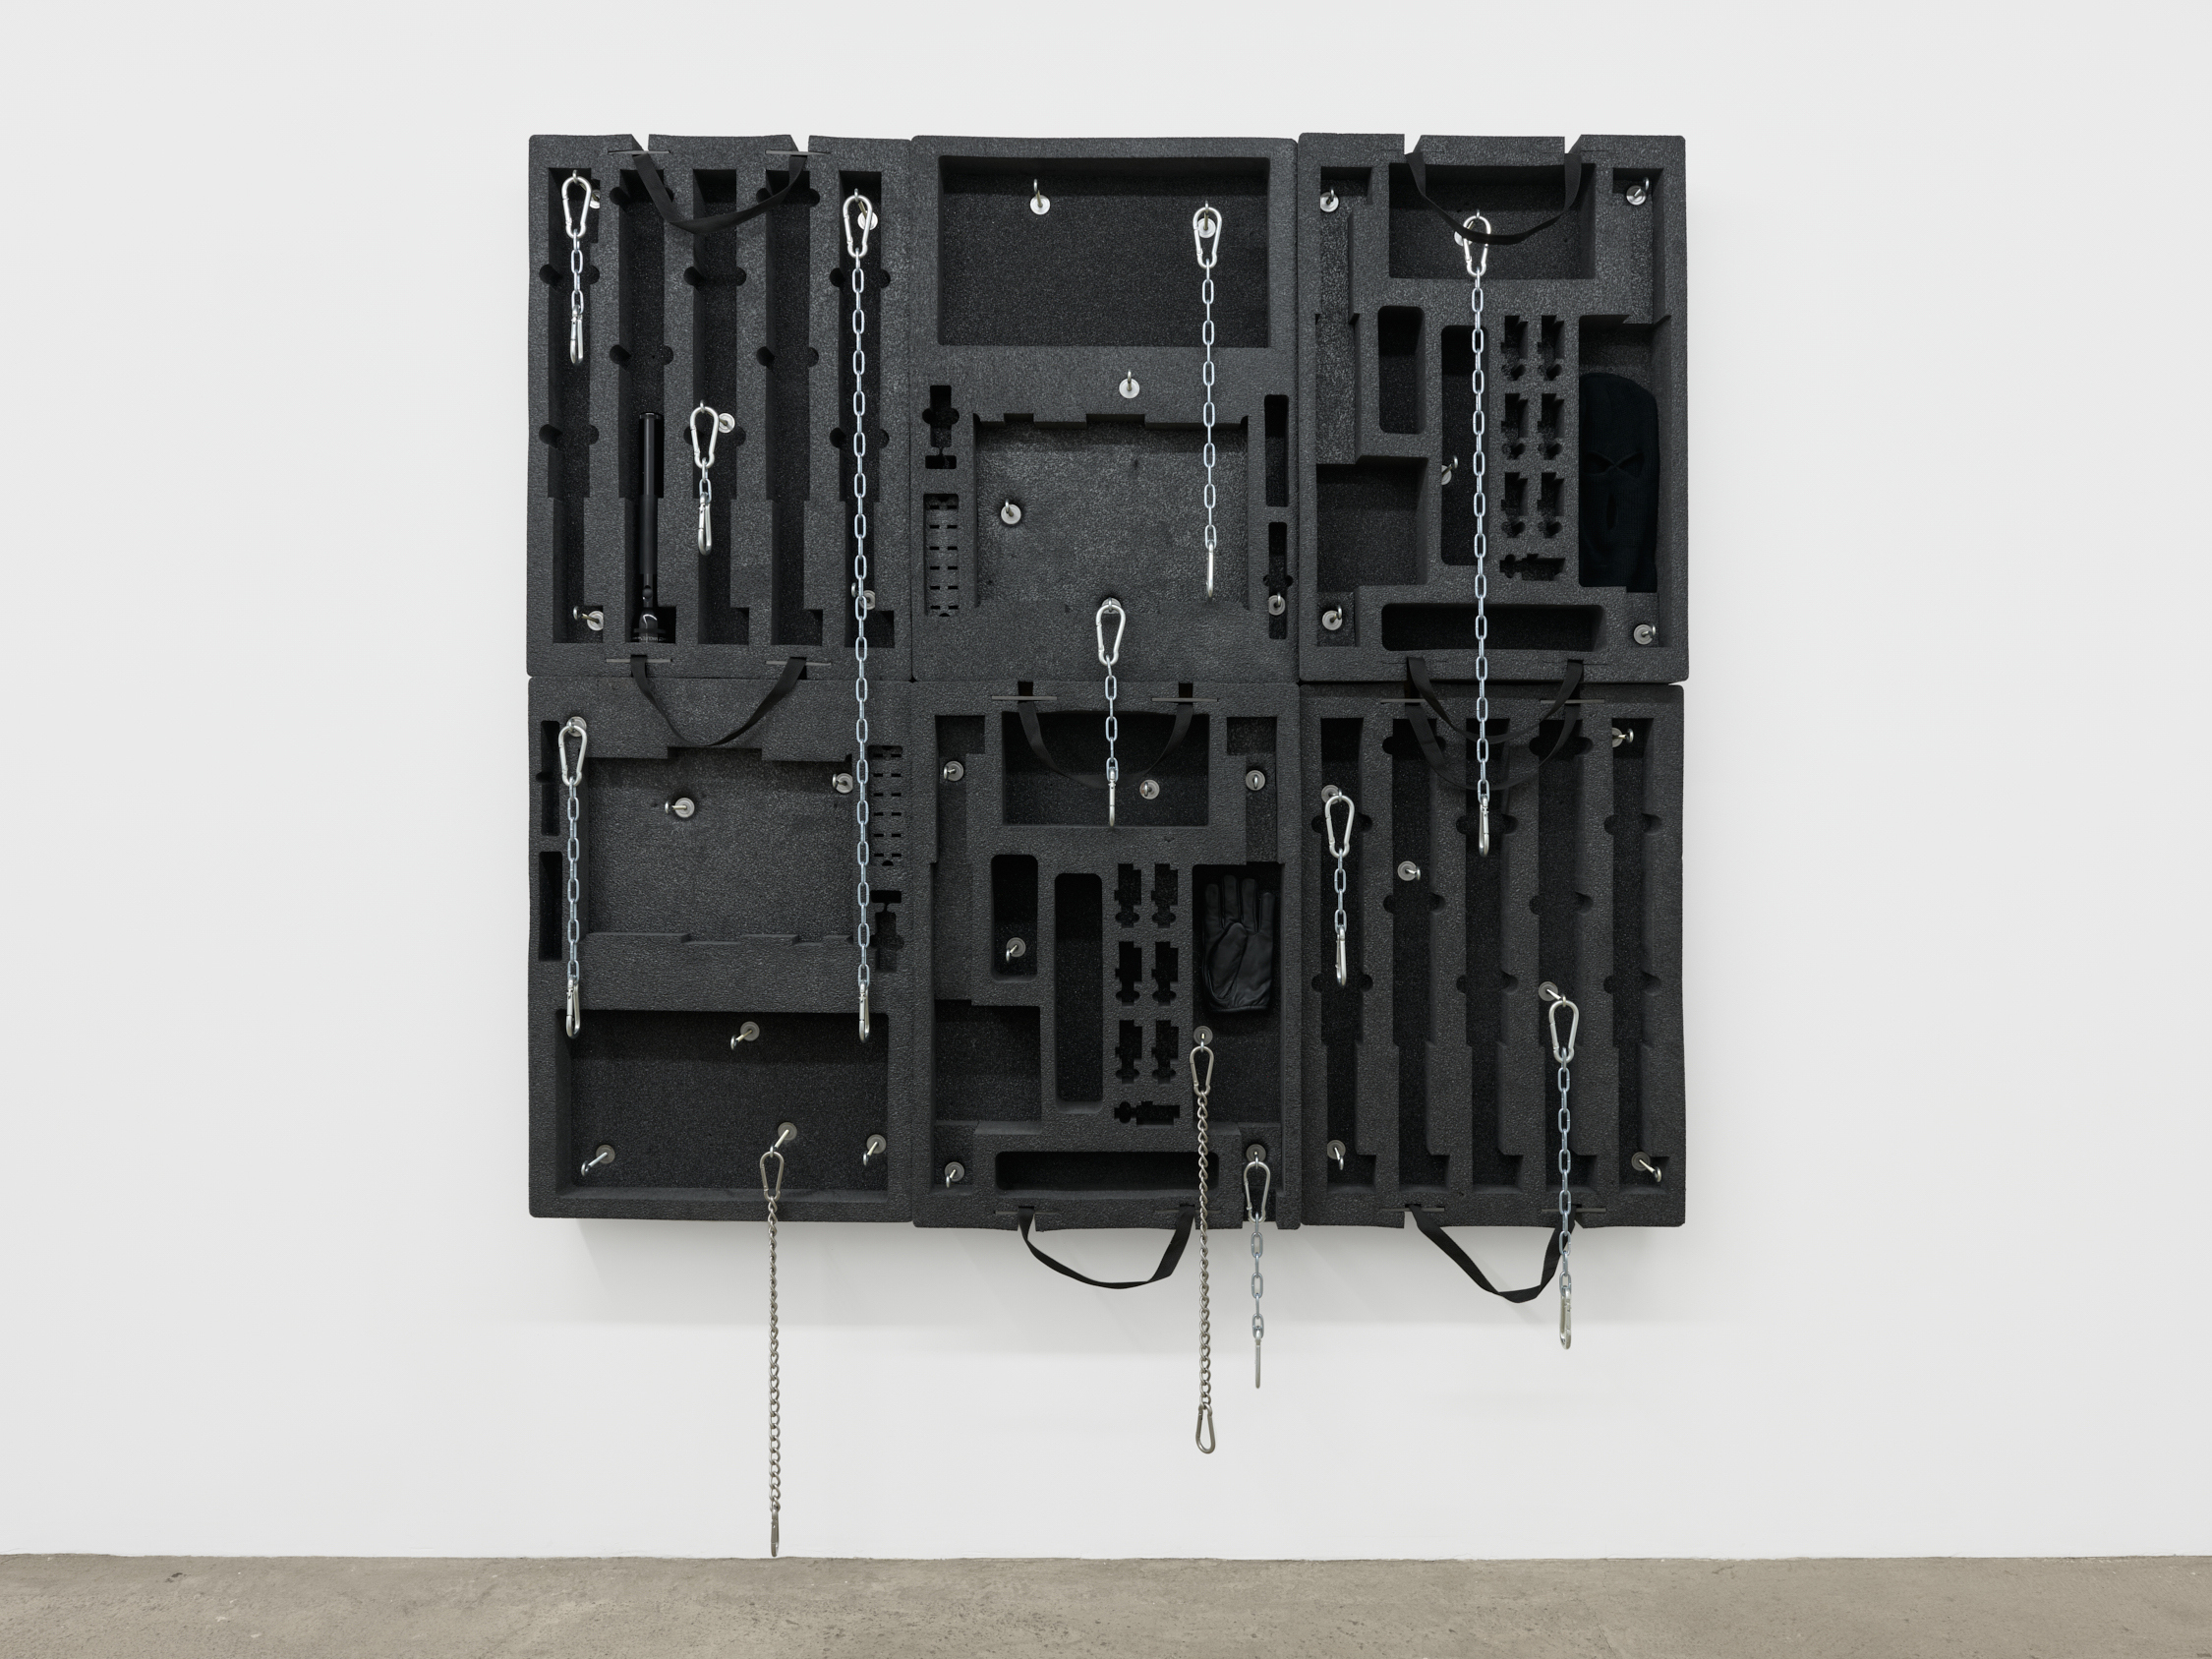 Joe Bartram Constellation, 2022 Pelican case inserts, stainless steel chain, snap links,  miscellaneous hardware, wood, ski mask, Maglite, leather glove 72 x 68 x 8 inches (183 x 173 x 20 cm)